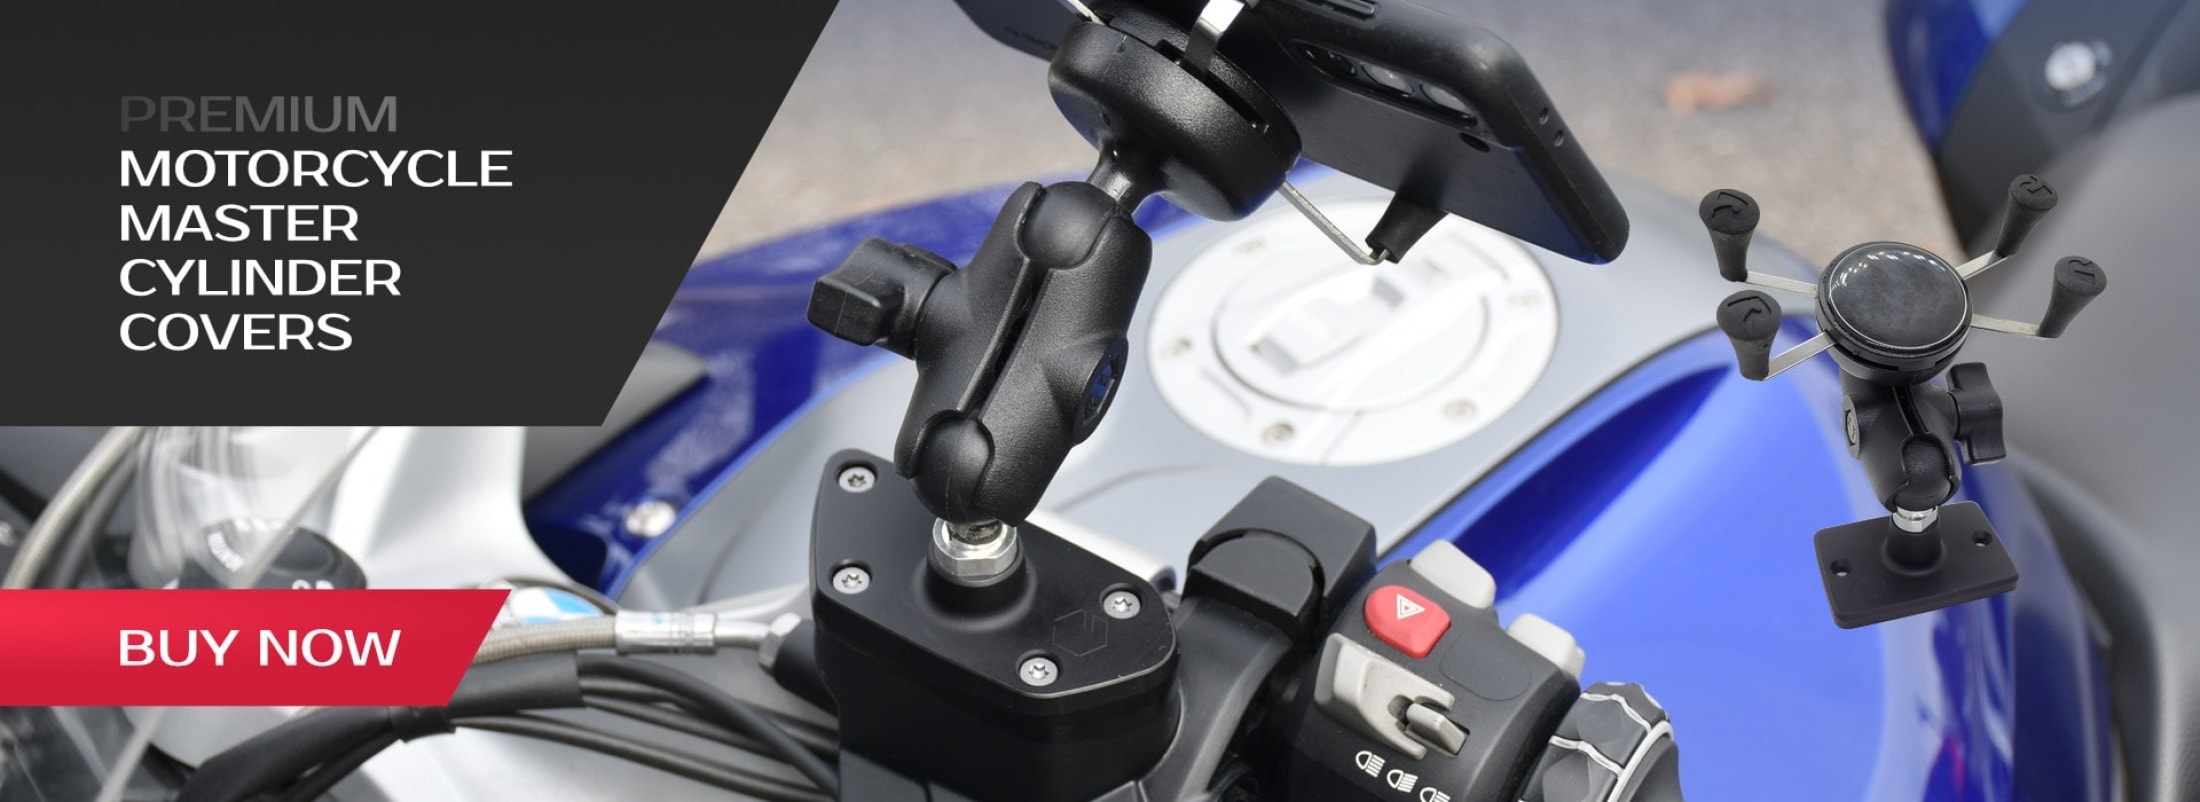  Motorcycle Master Cylinder Covers for RAM Mounts for mobile phones